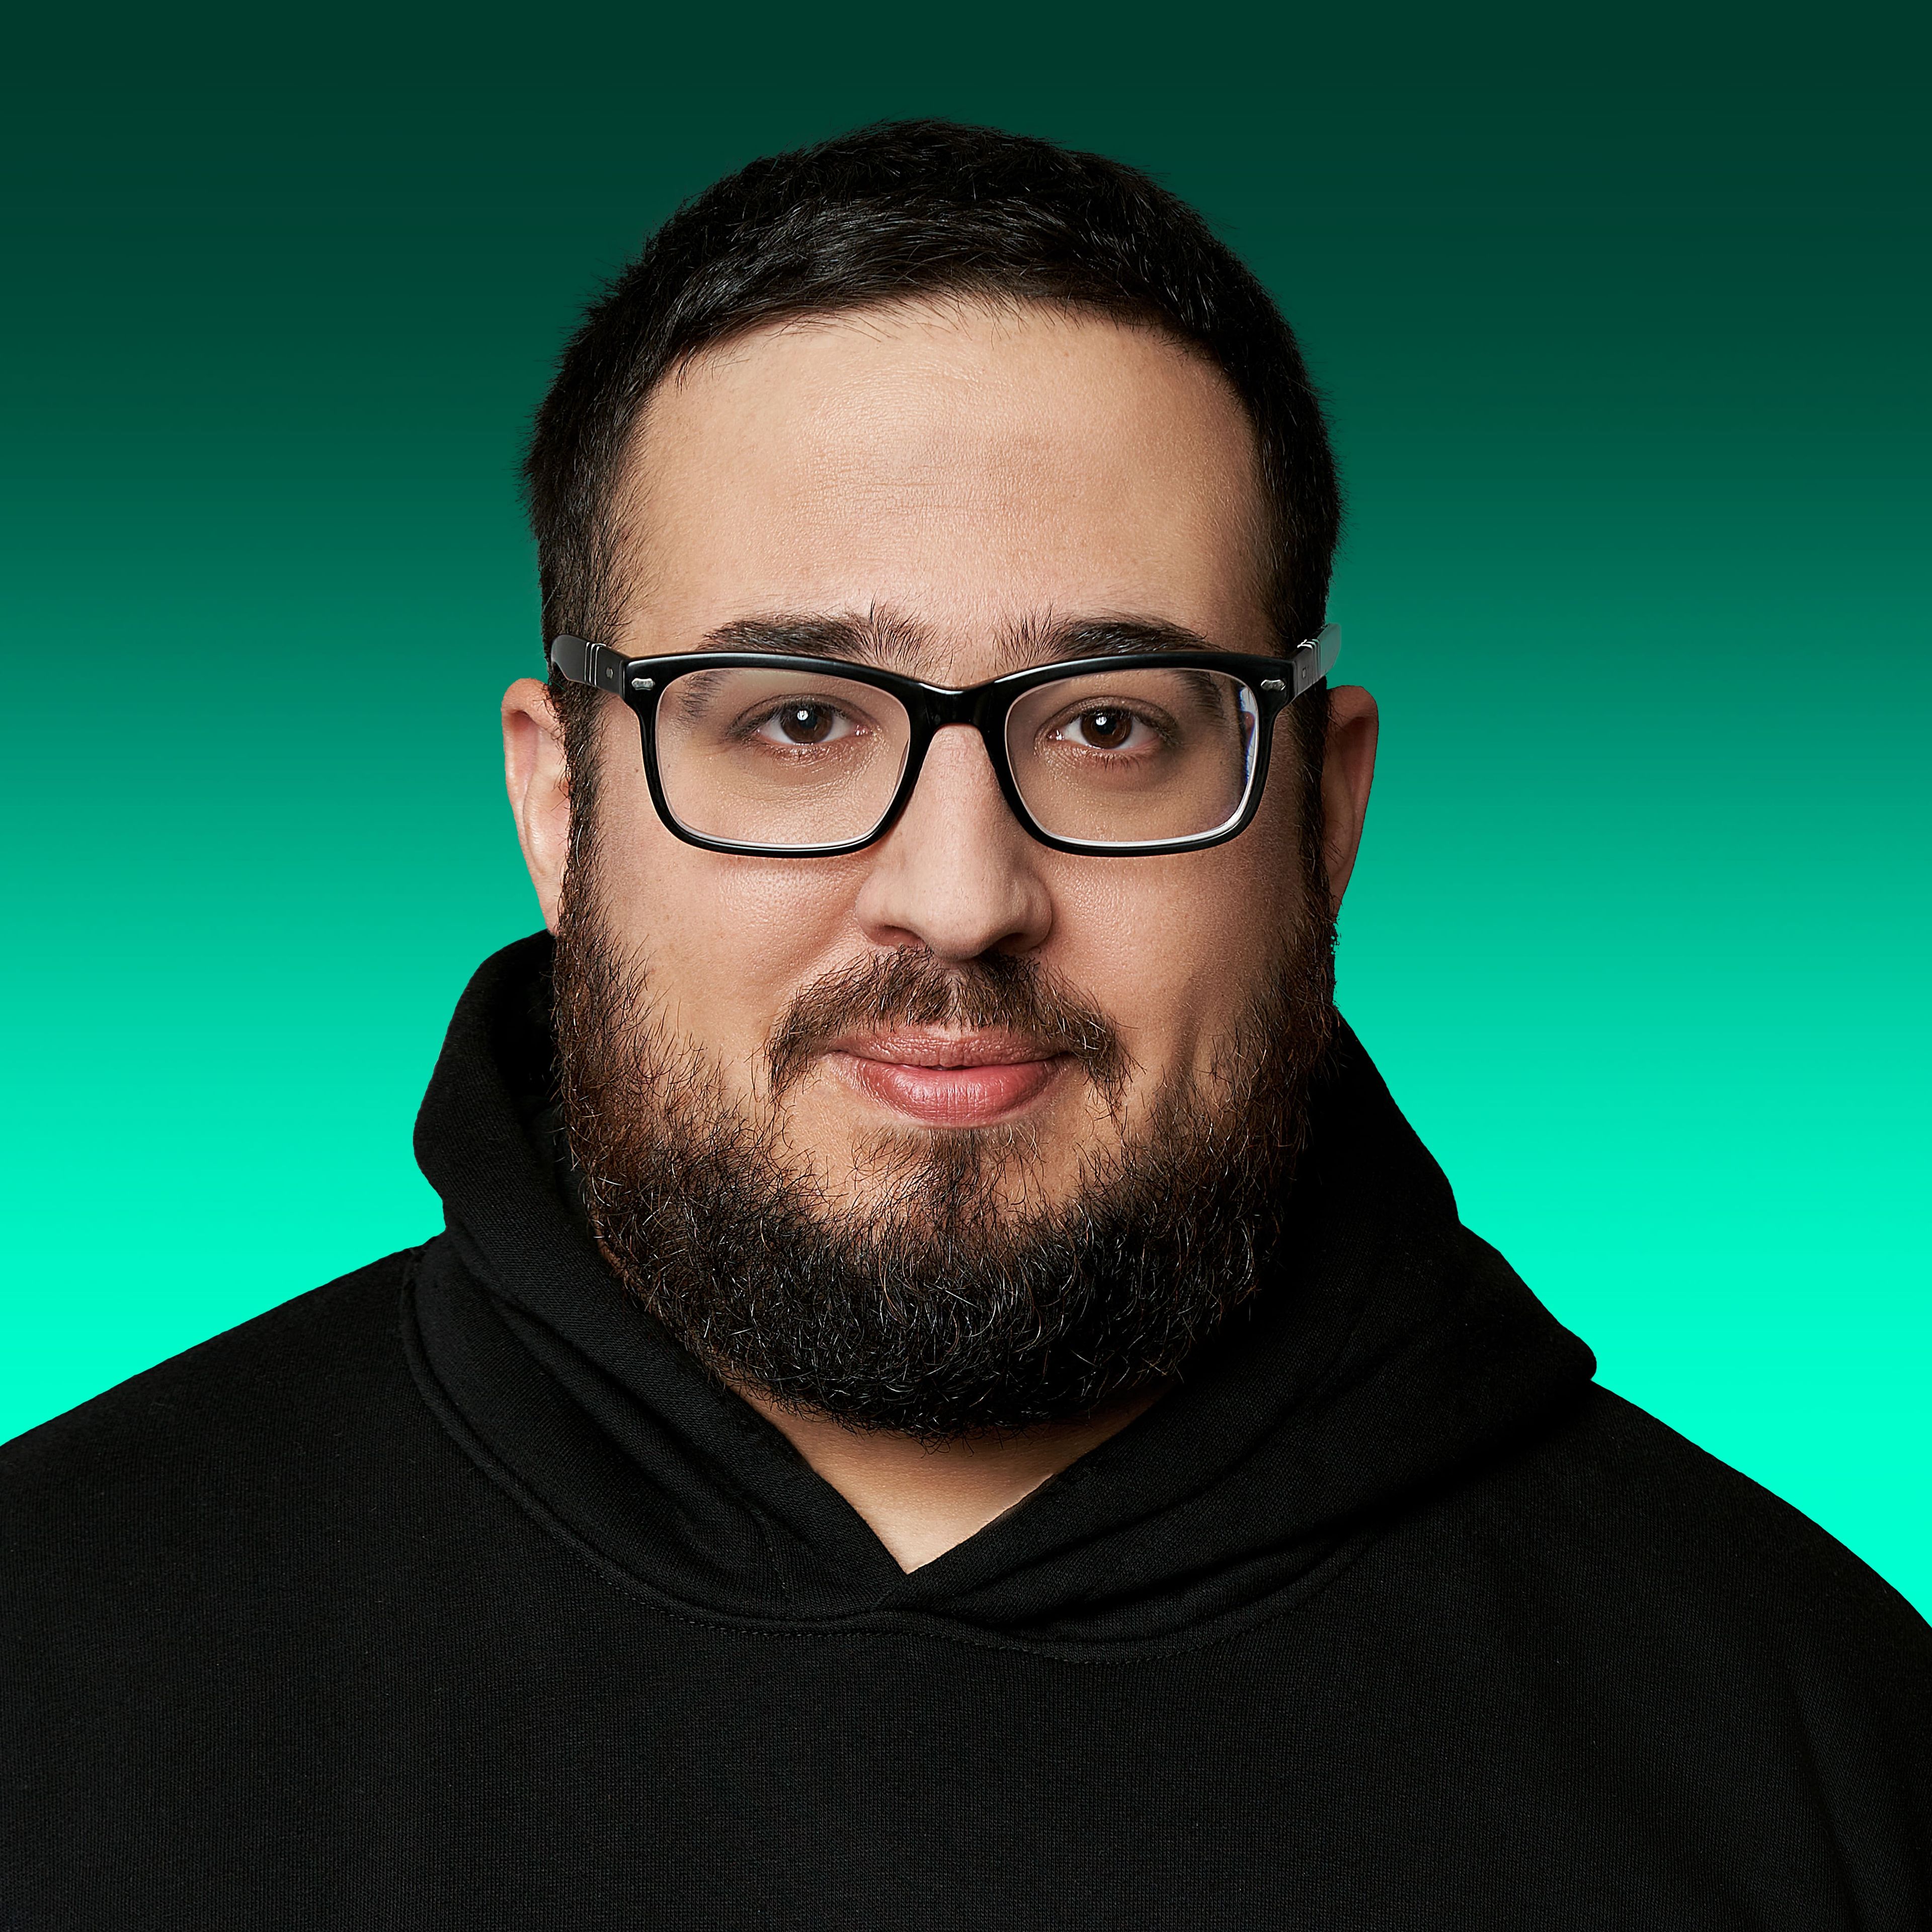 Marc Rivero, a senior security researcher at Kaspersky.